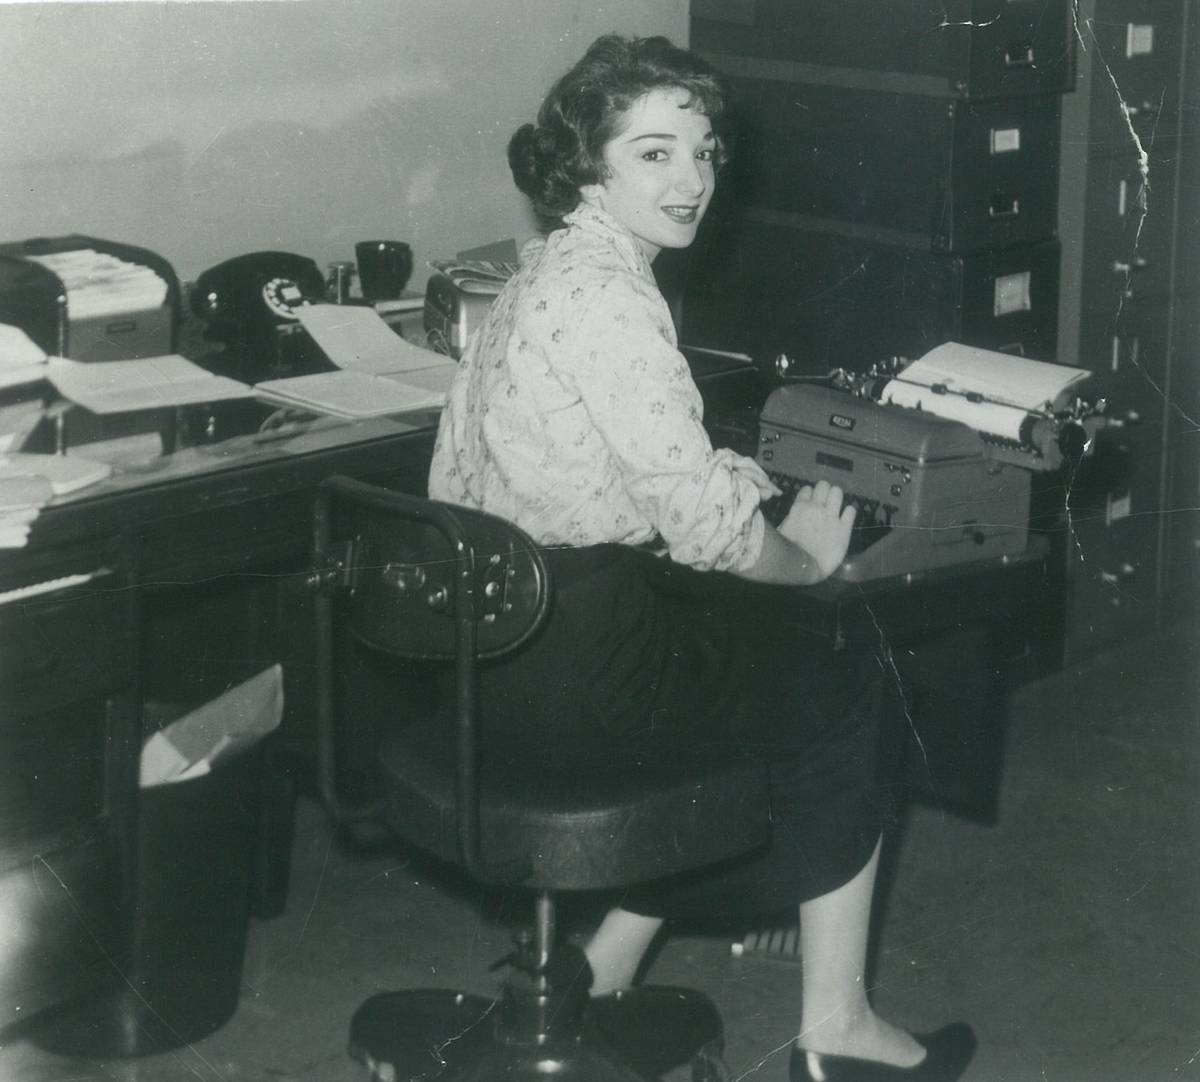 The author's mother at 20 as a secretary at the Merchandise Mart in Chicago